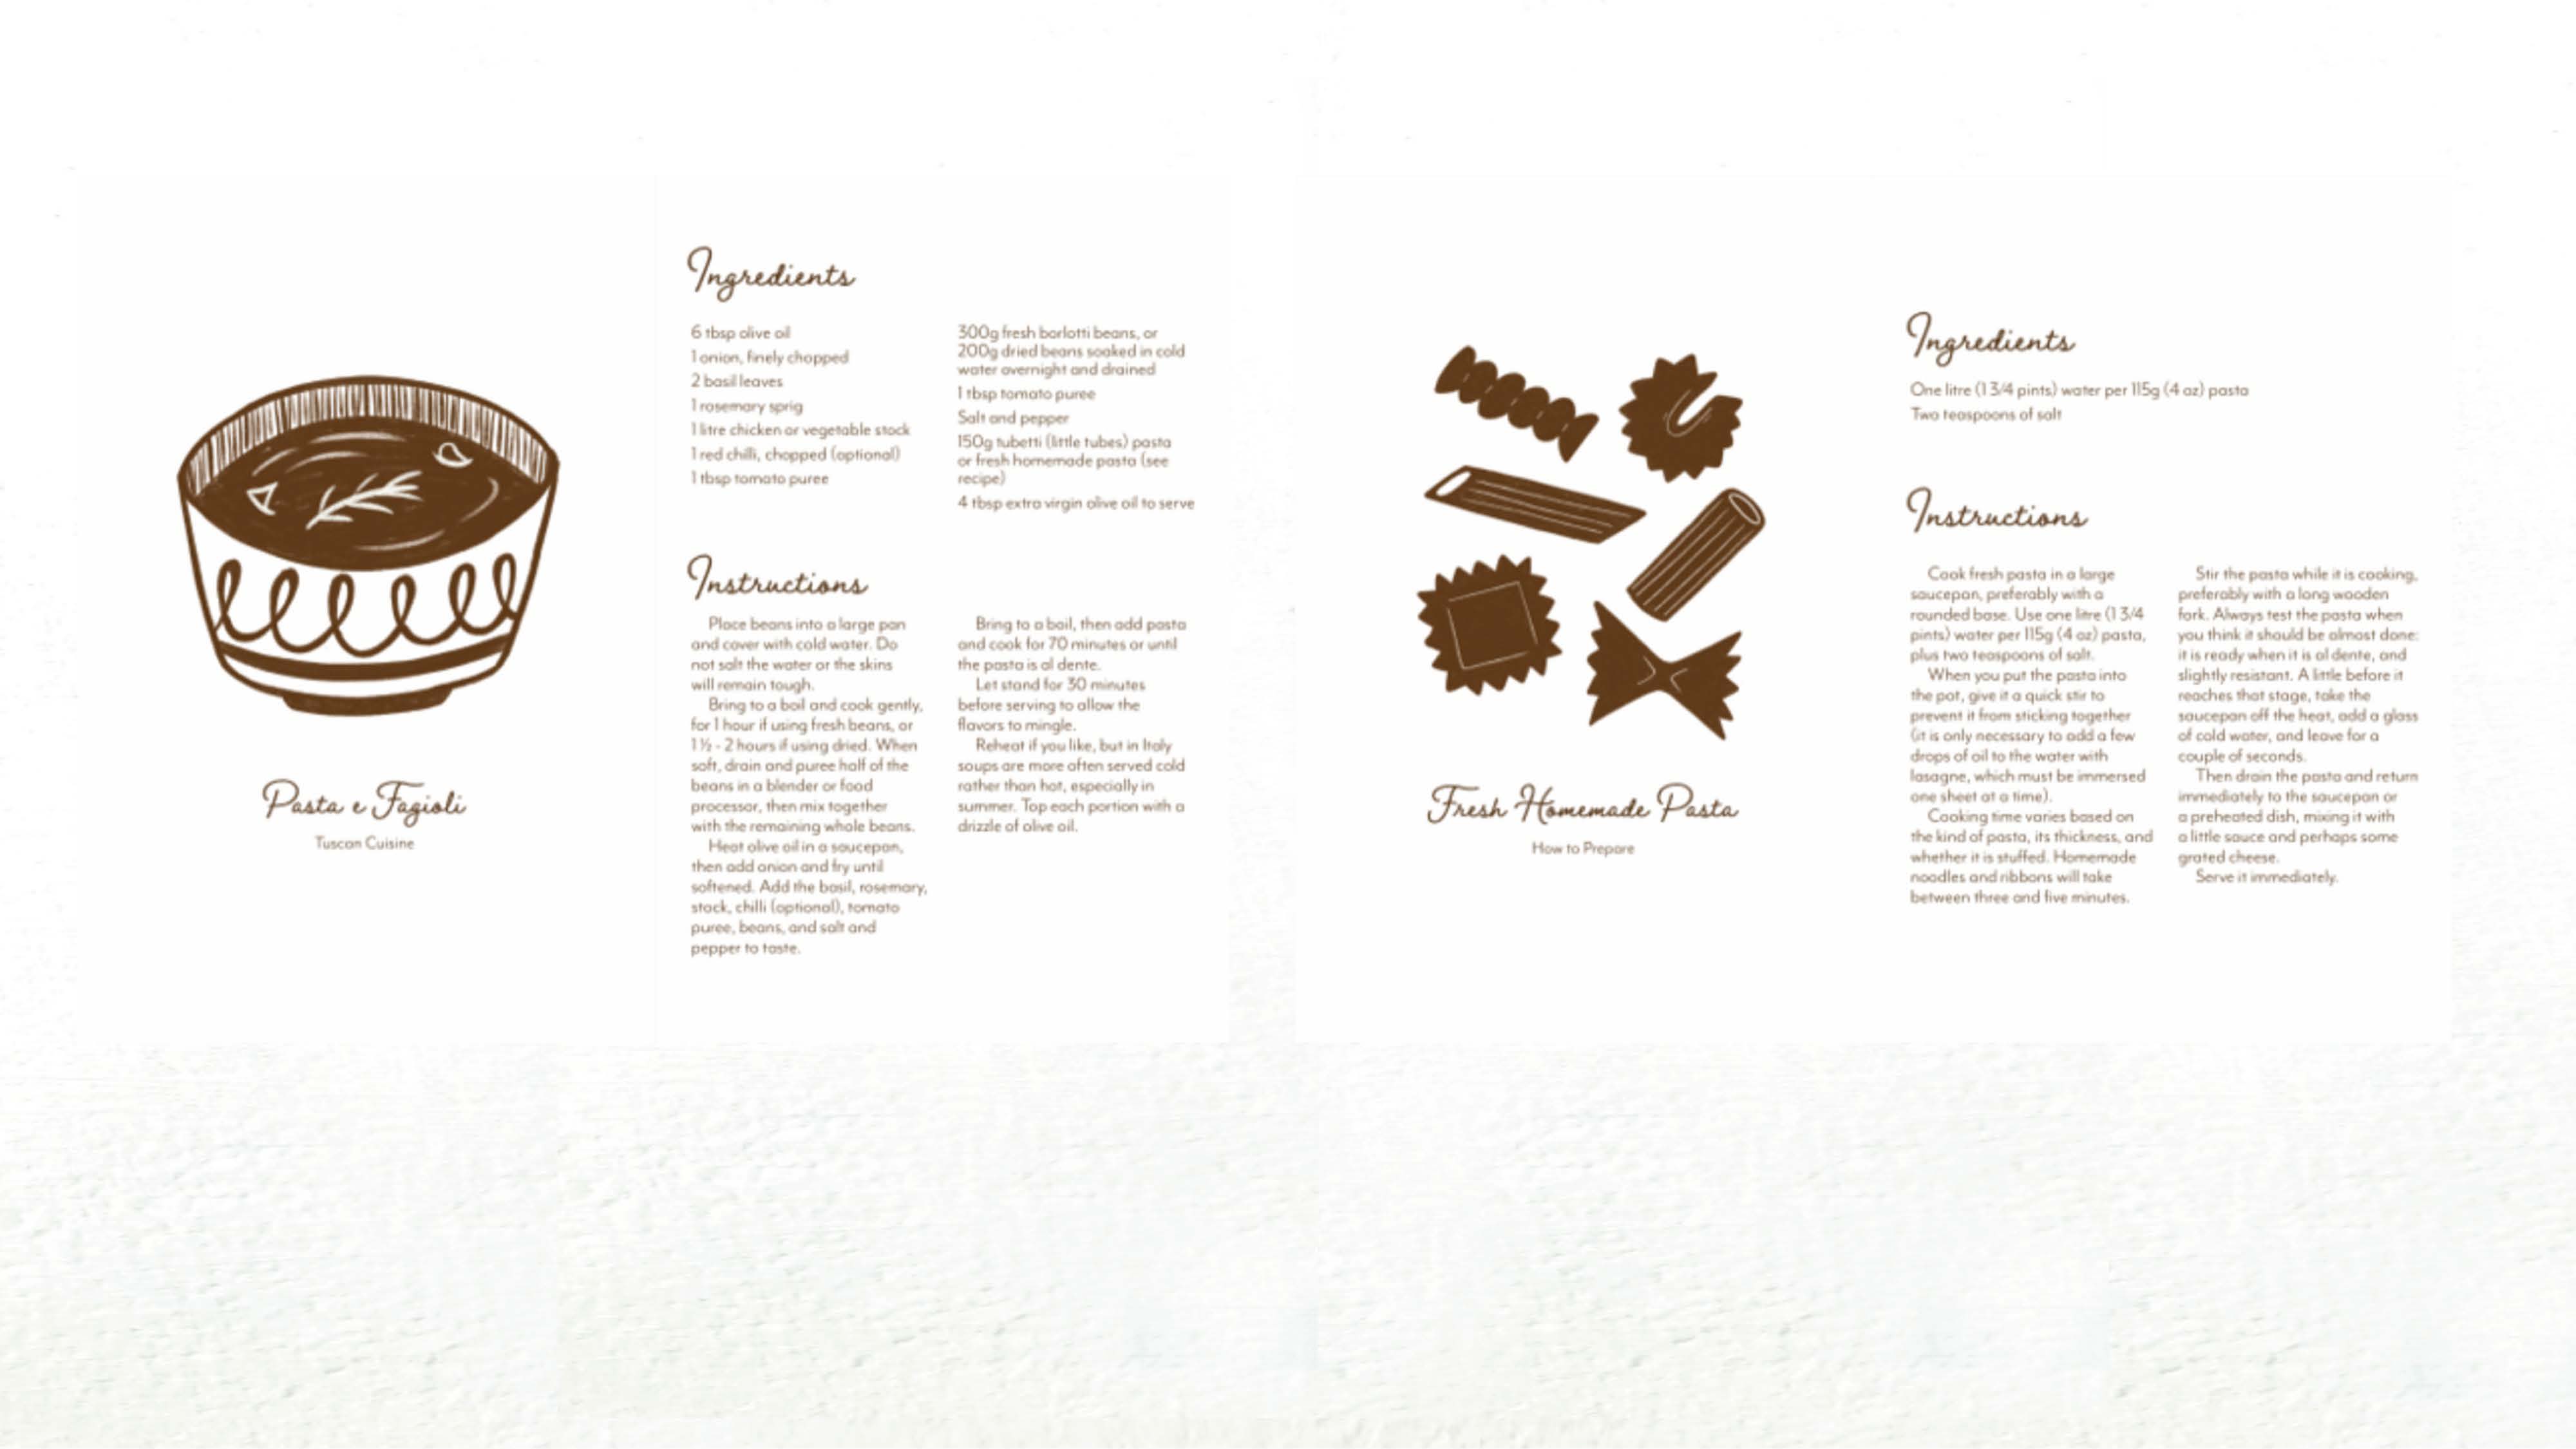 Teresa Woerther. “Recipes from Italy”, zine, digital design, 2021.